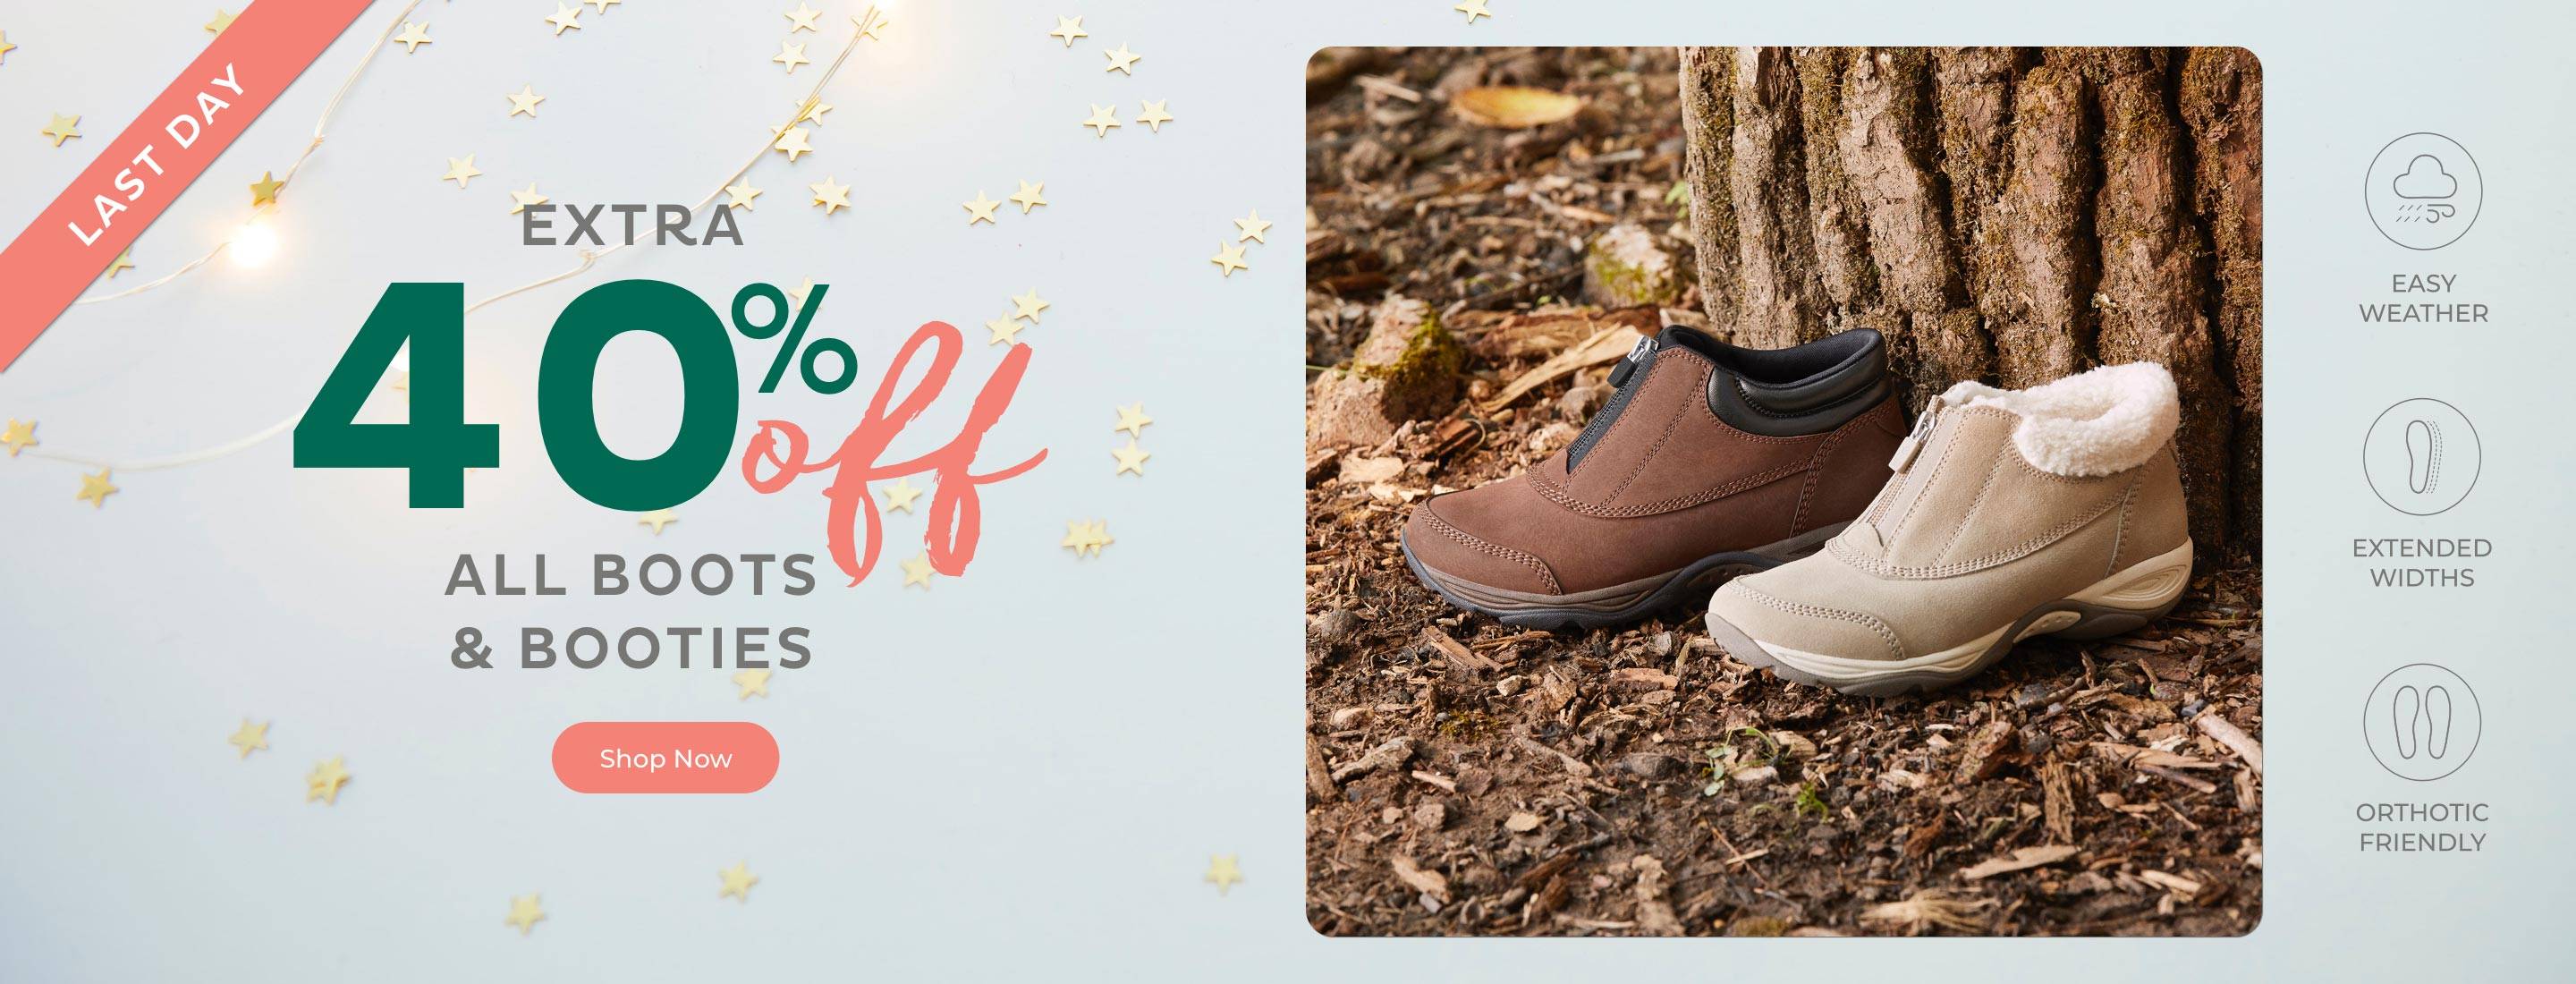 Extra 40% Off All Boots & Booties